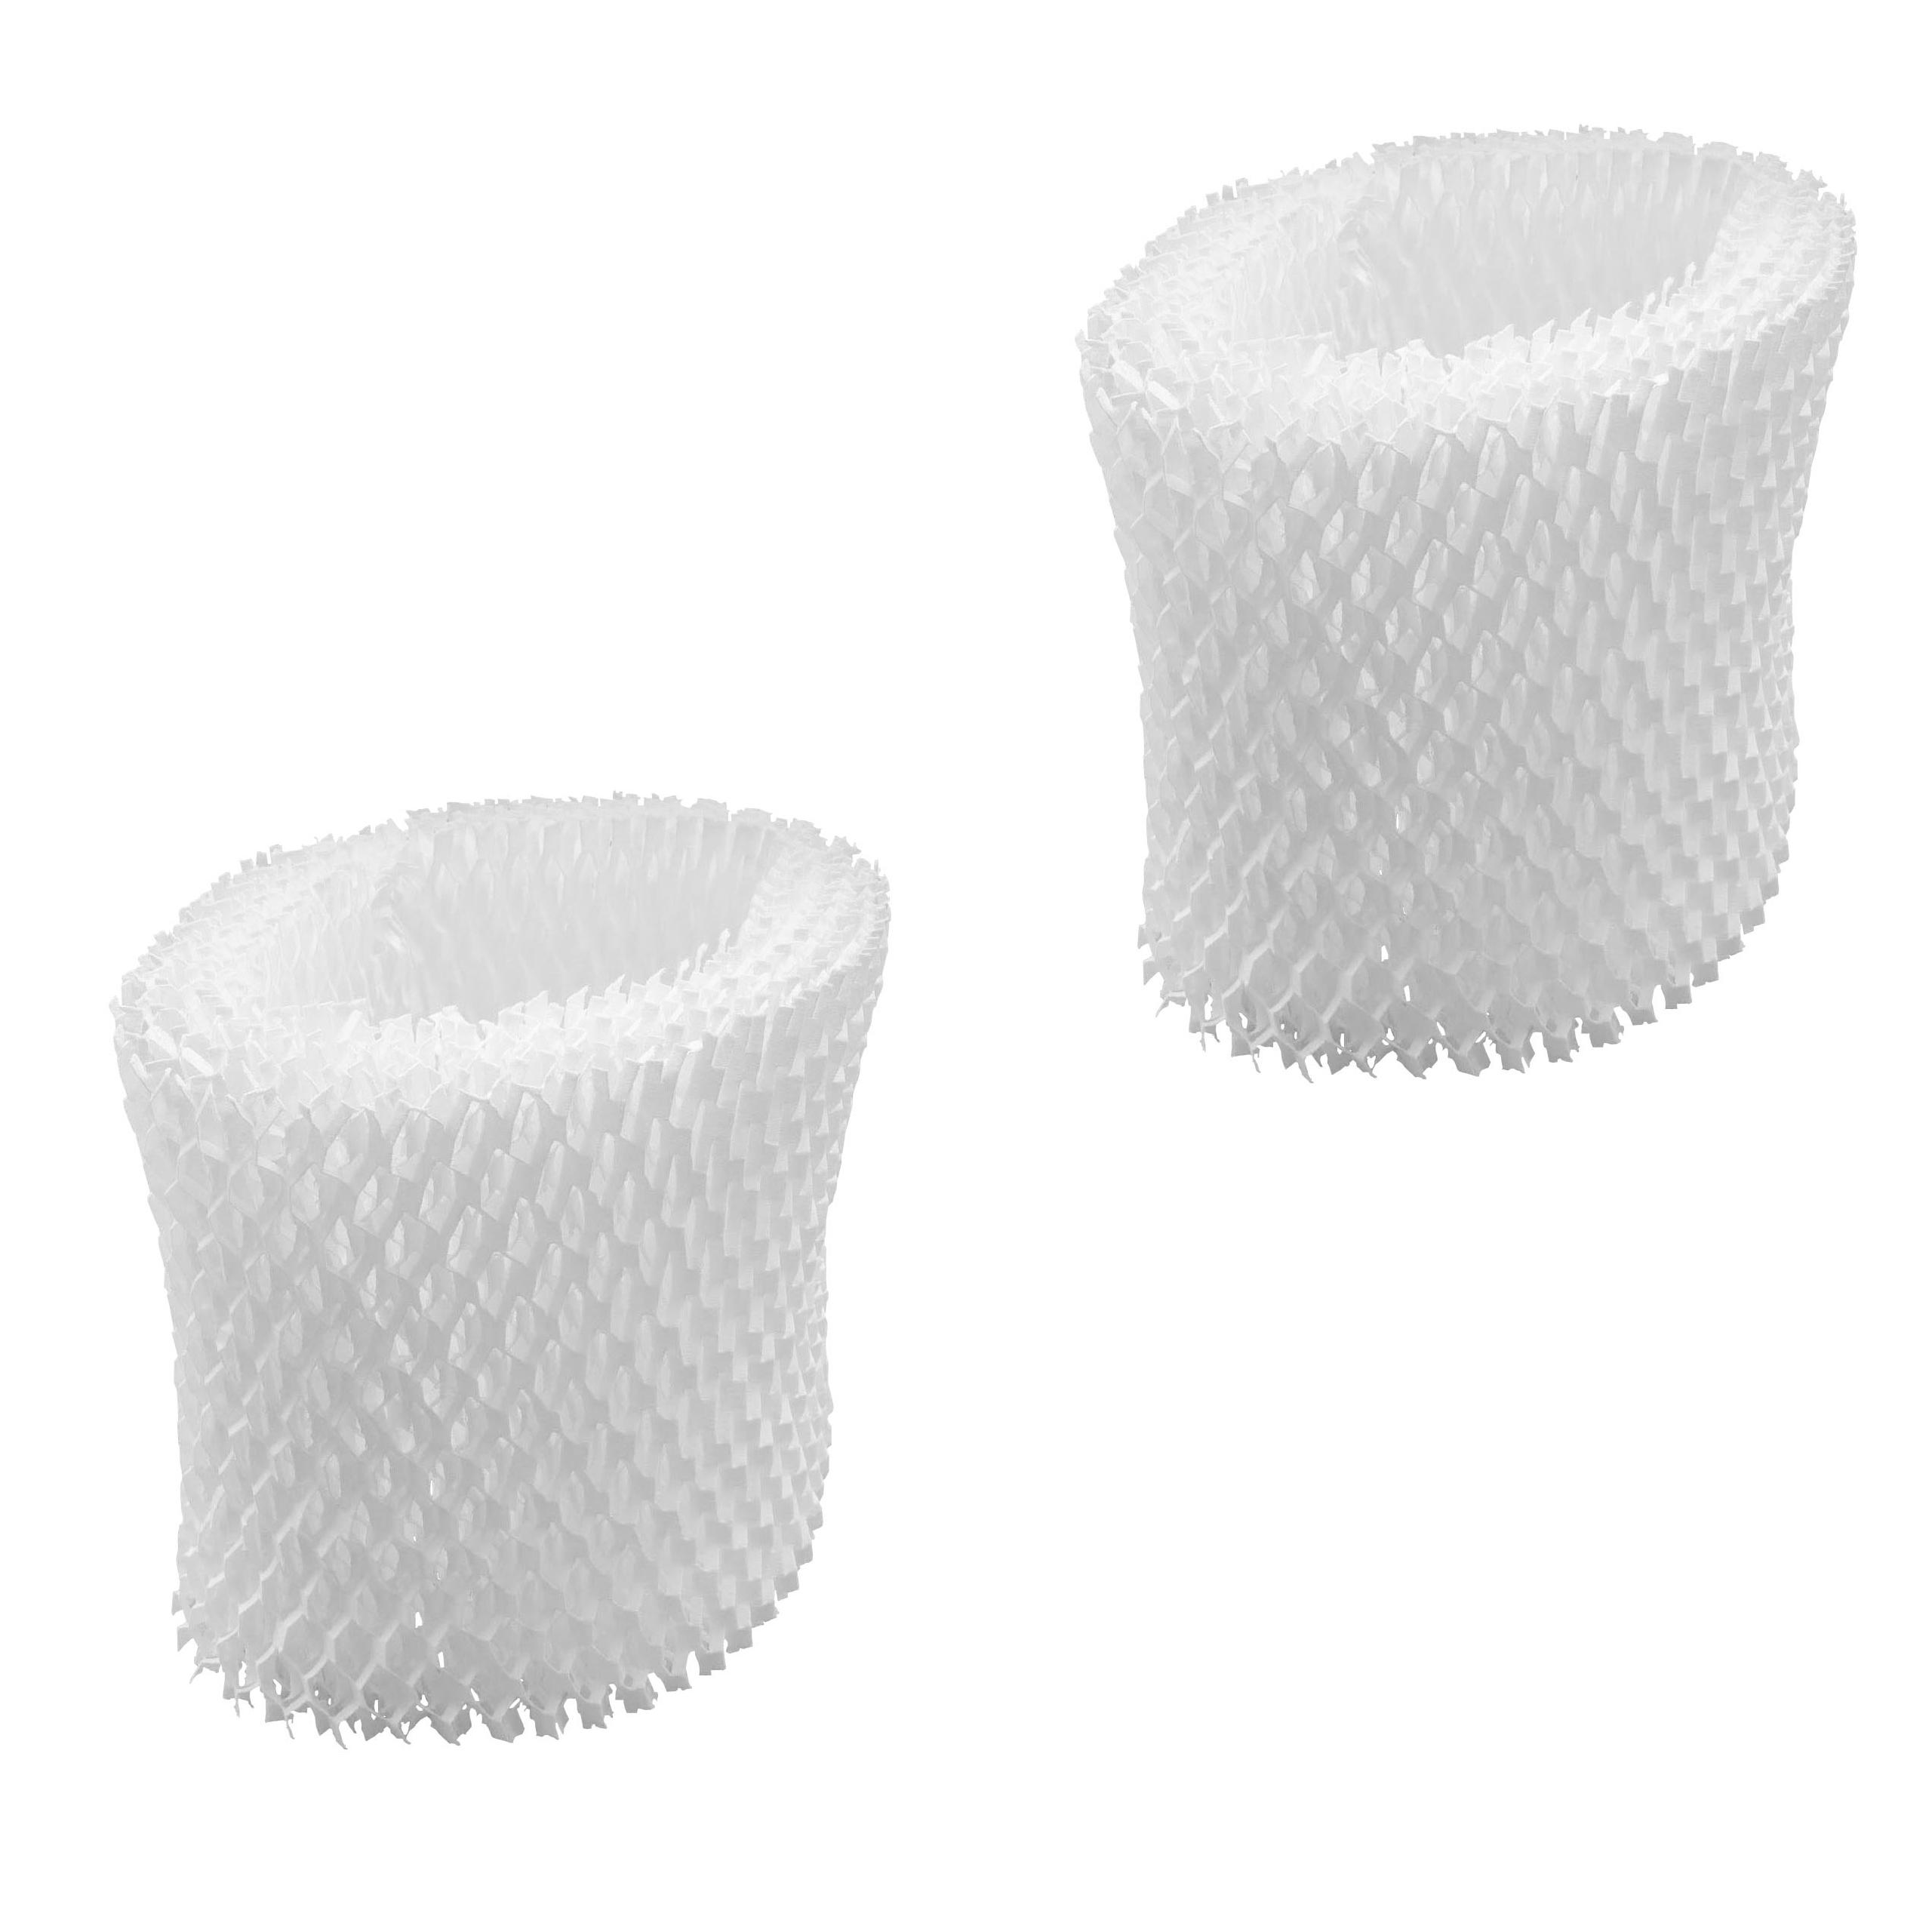 2x Filter replaces Philips HU4136/10 for Humidifier